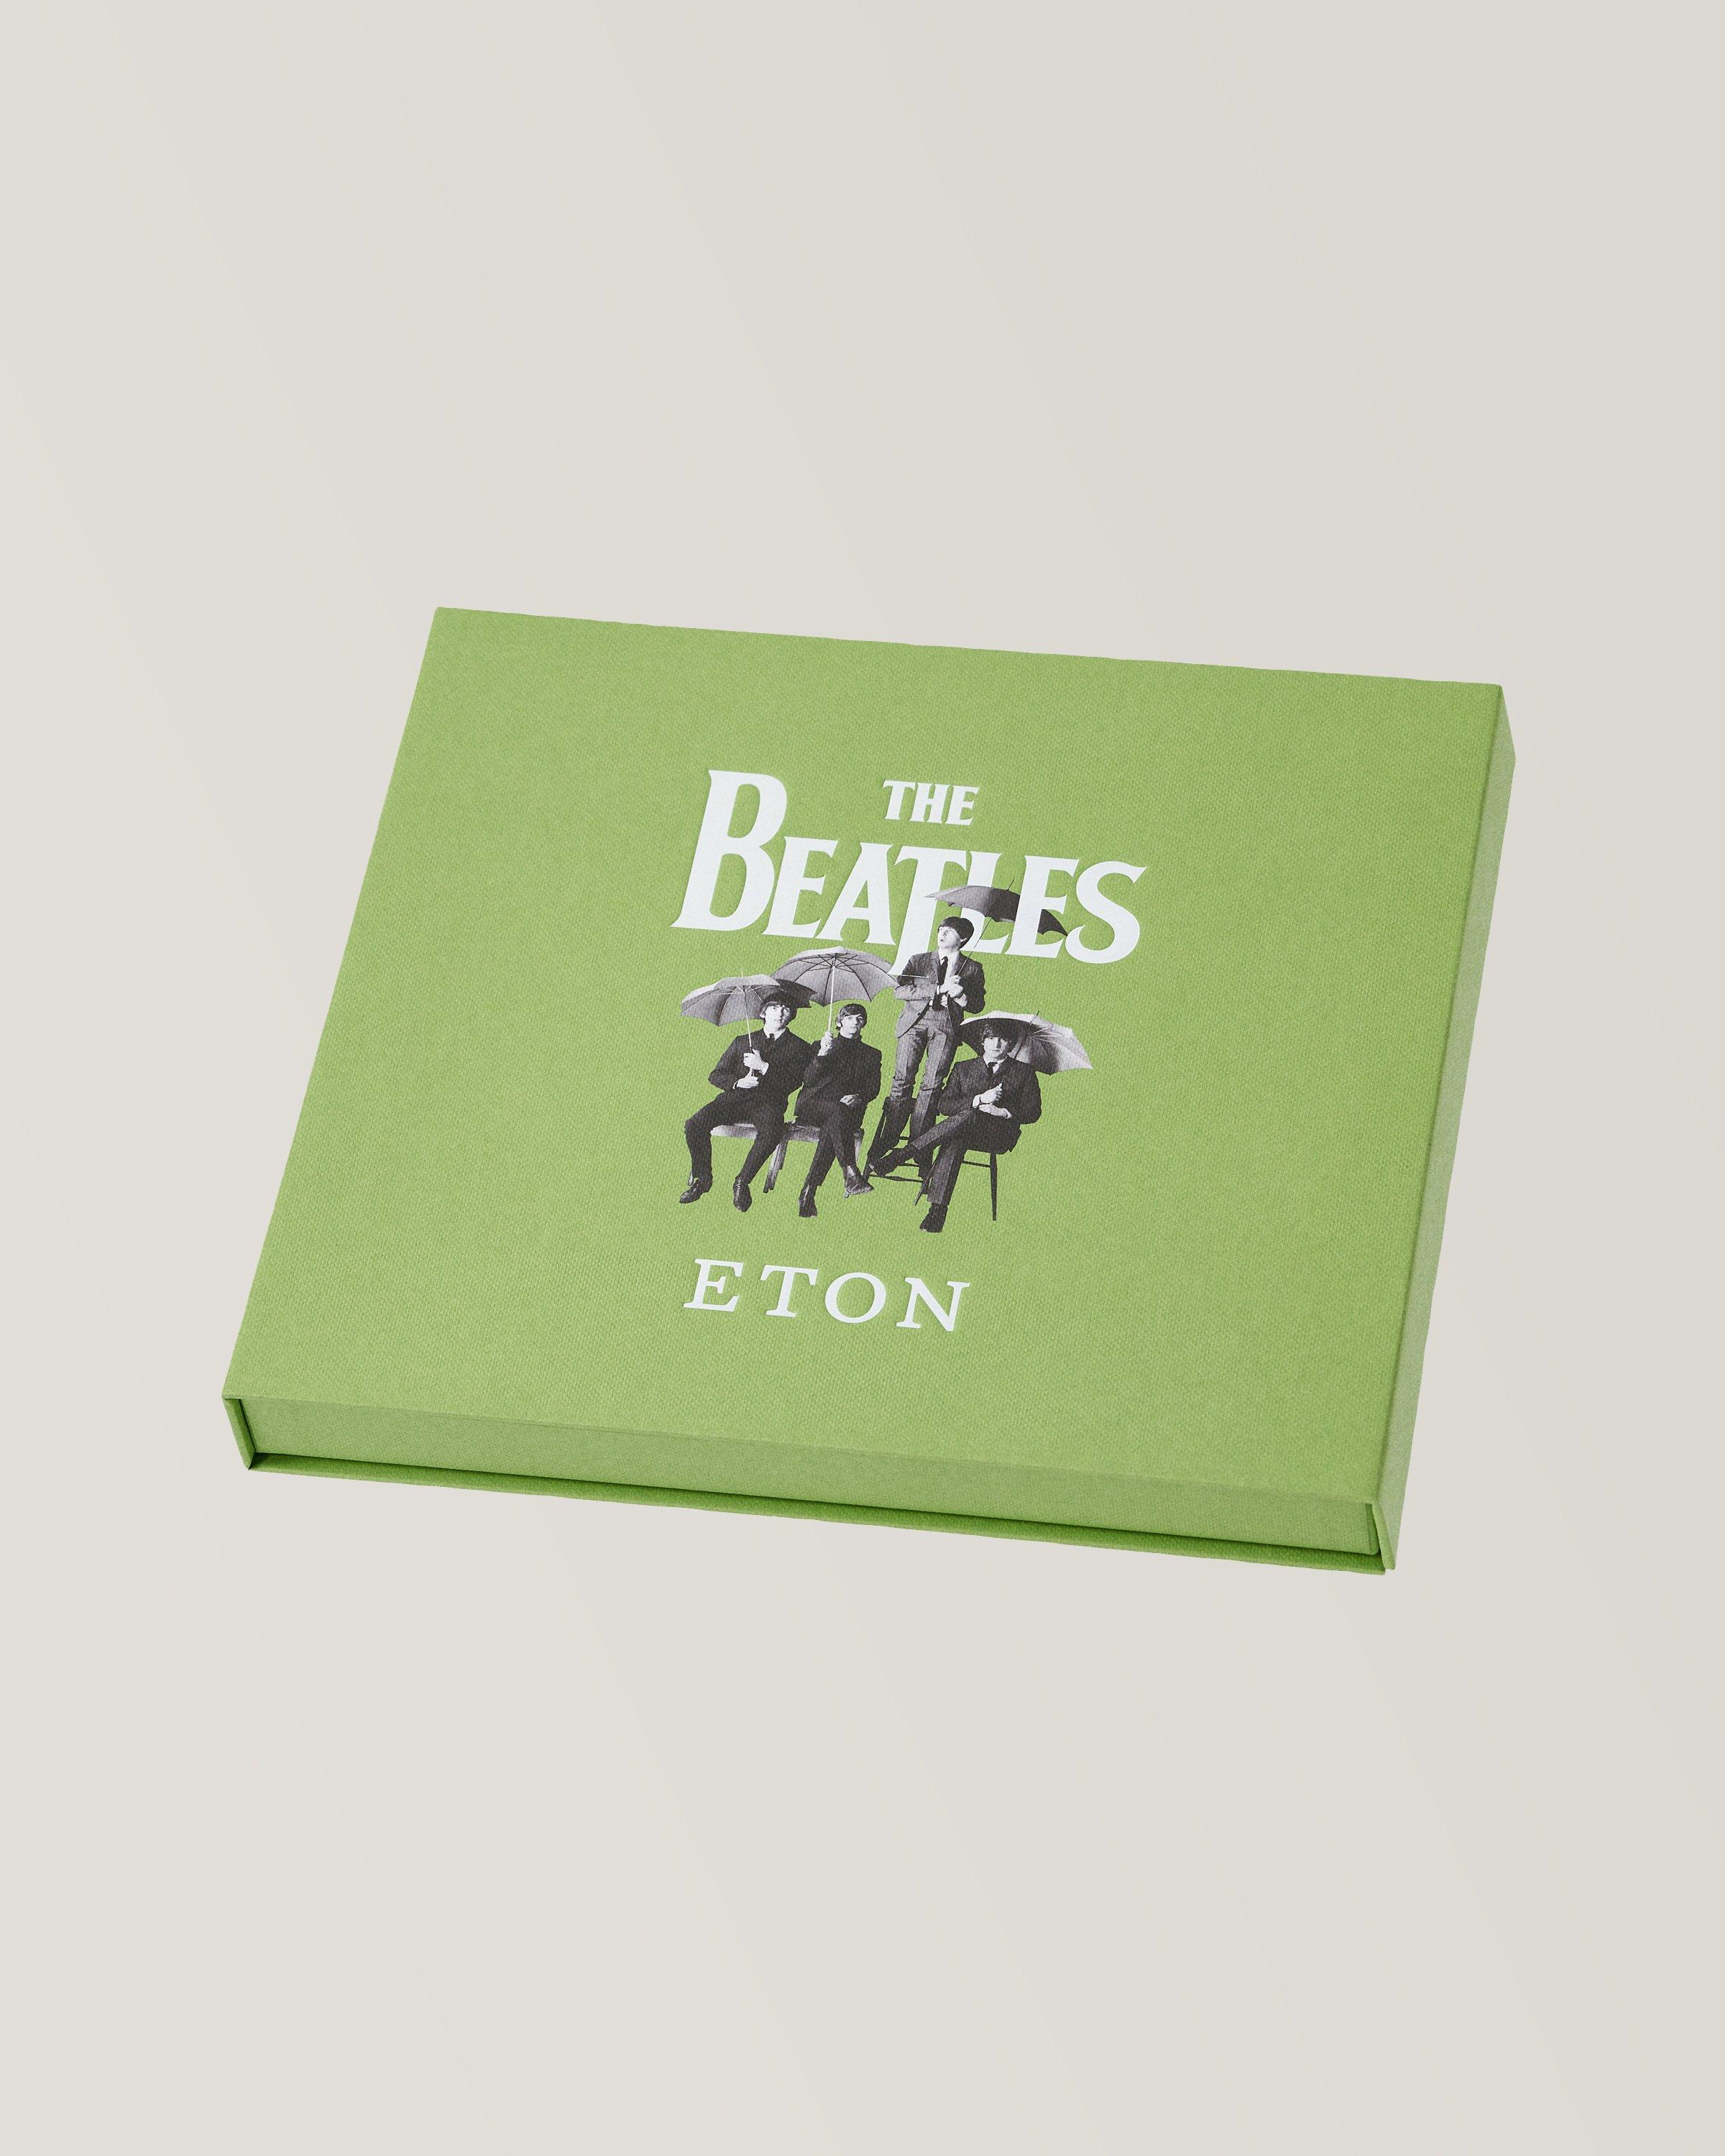 The Beatles Collection Octopus Garden Pocket Square image 2